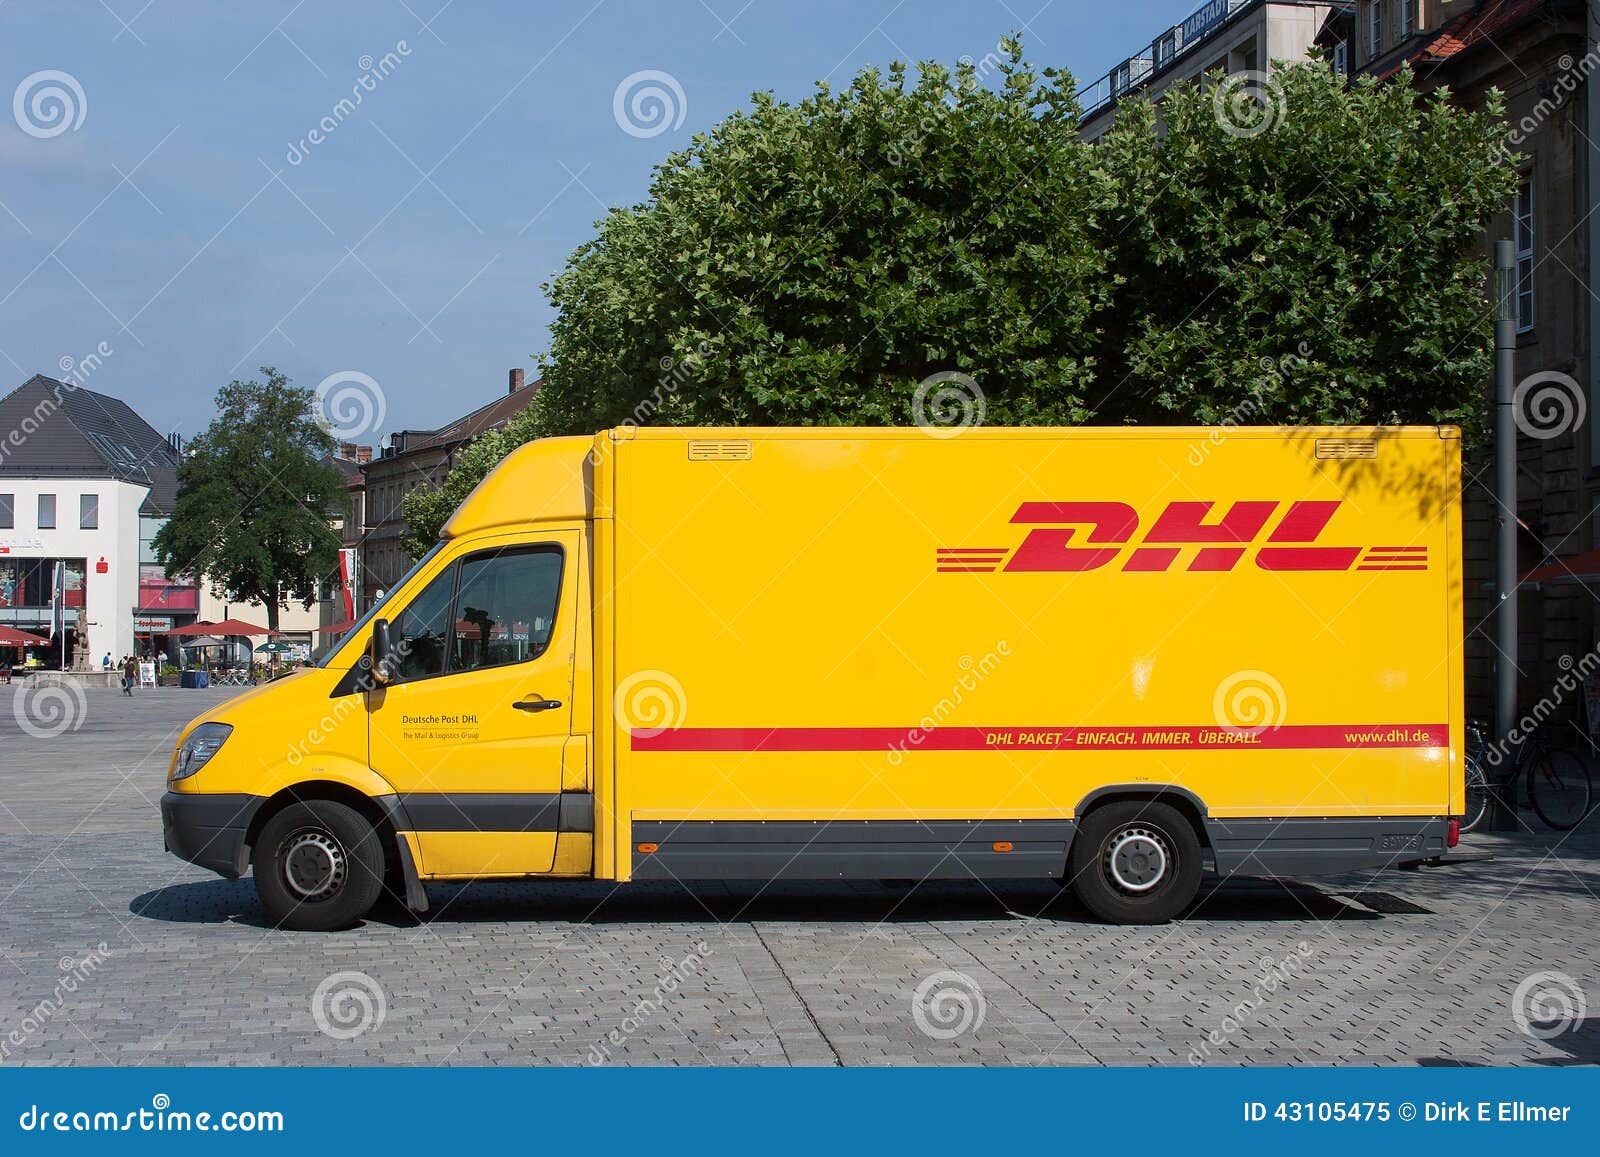 German Post DHL Courier Delivery Service Truck Editorial Image - Image ...